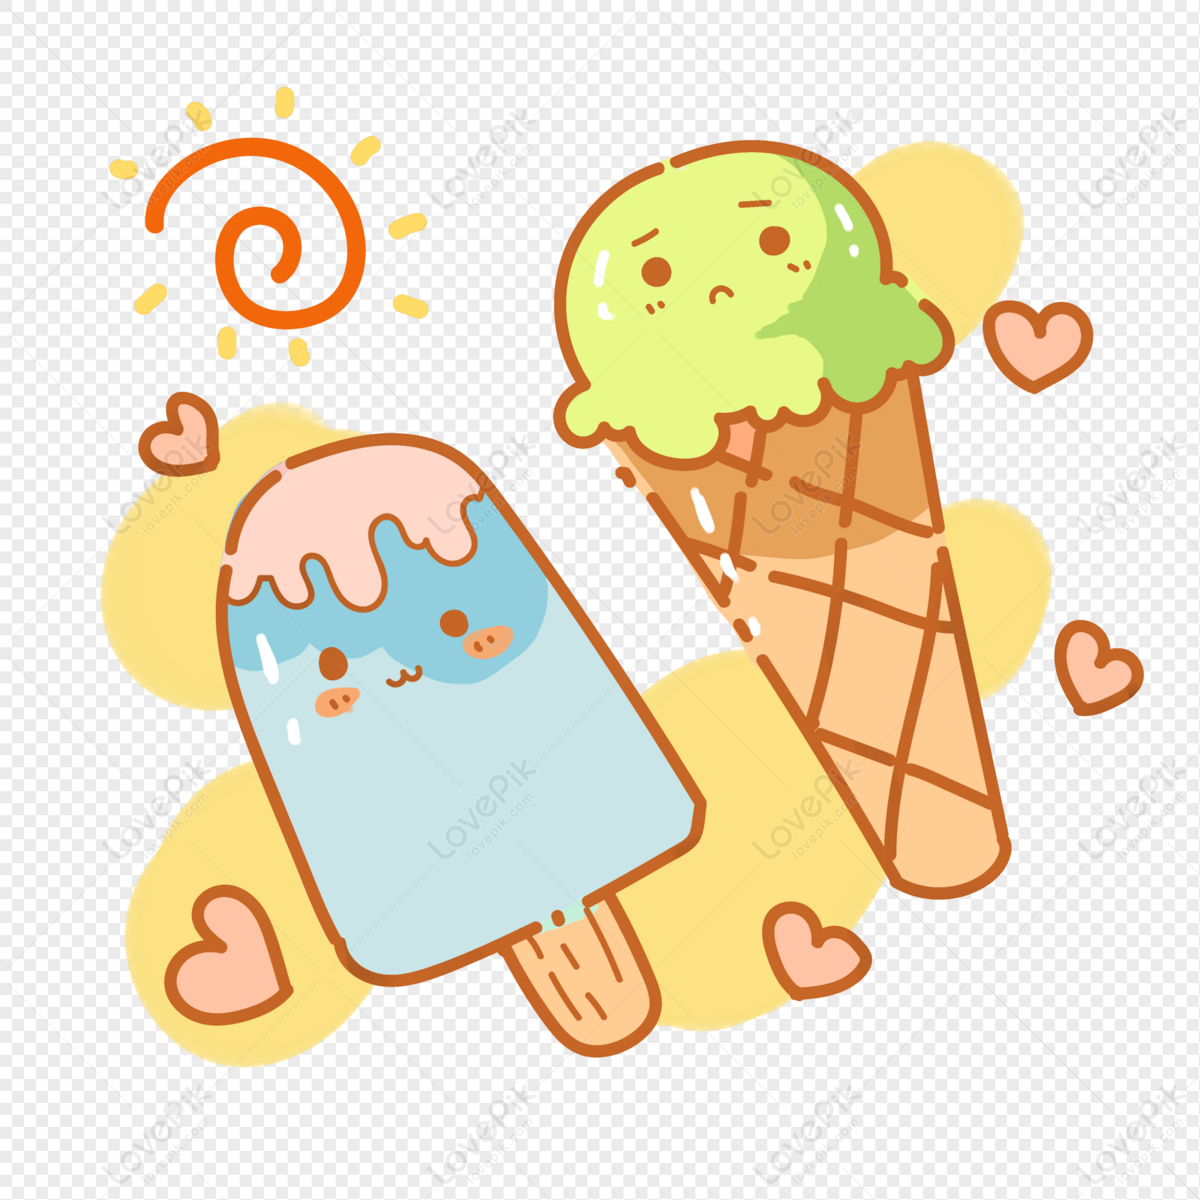 Ice Cream And Ice Cream PNG Transparent Image And Clipart Image For Free  Download - Lovepik | 401086517